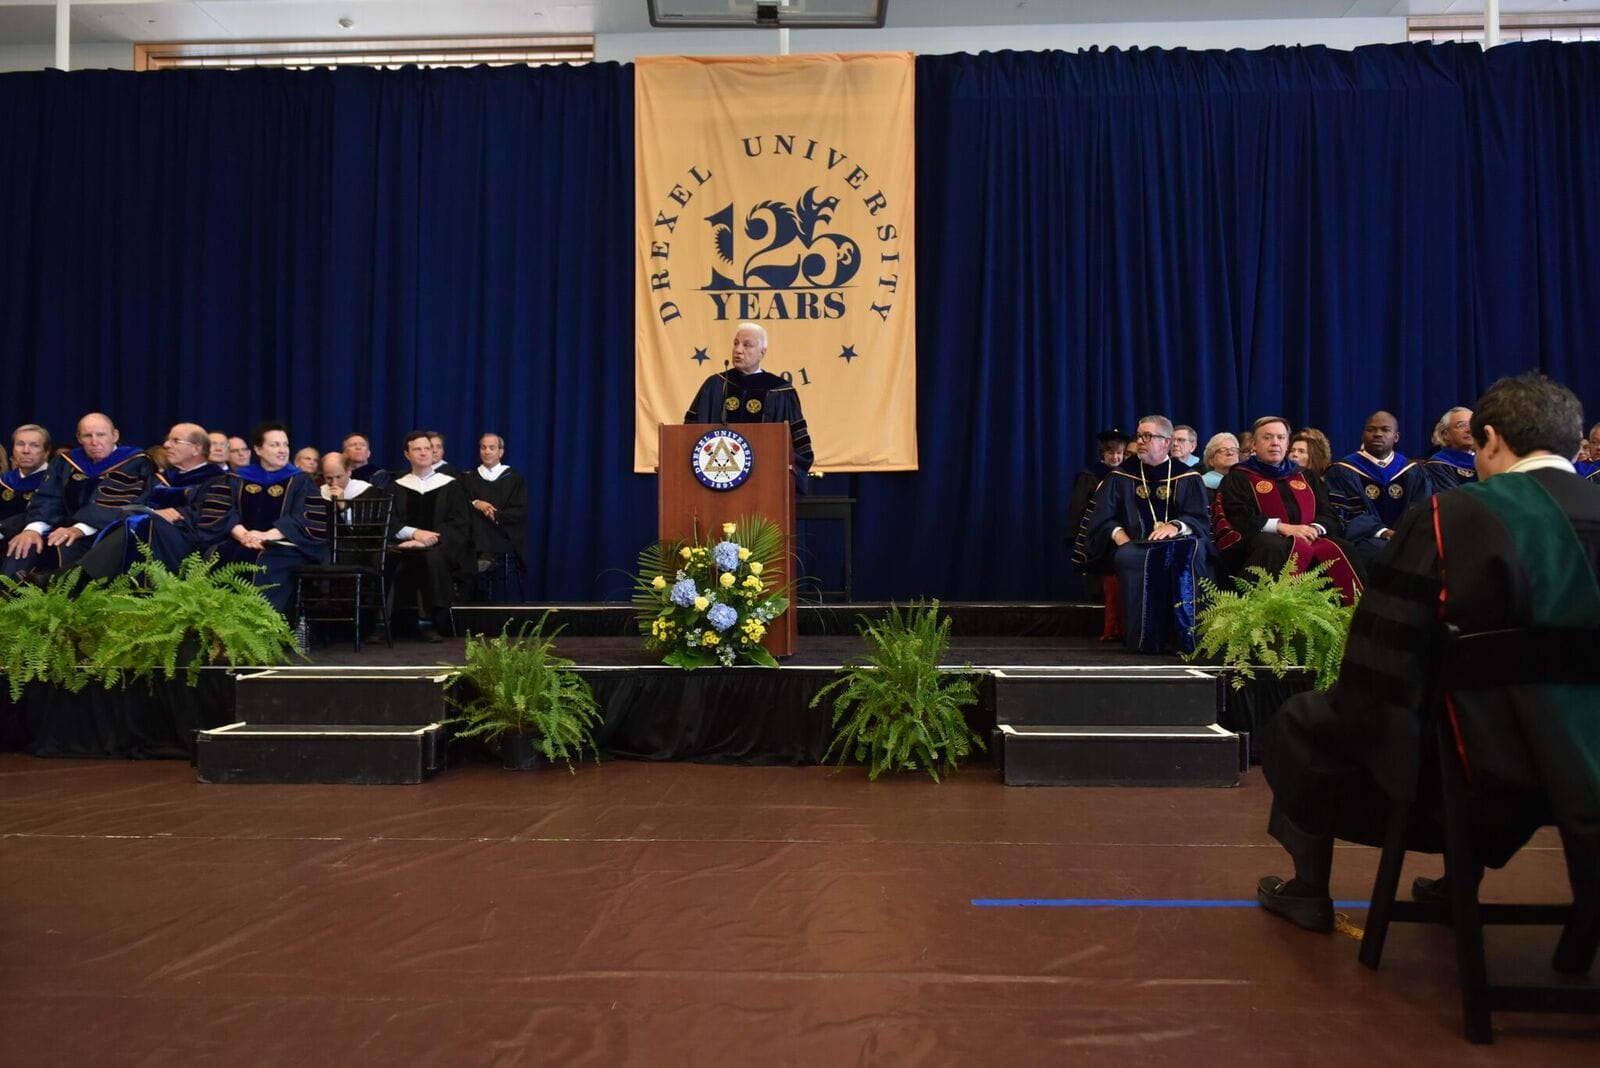 Richard A. Greenawalt ‘66, chairman of the Drexel Board of Trustees, speaks at Convocation.